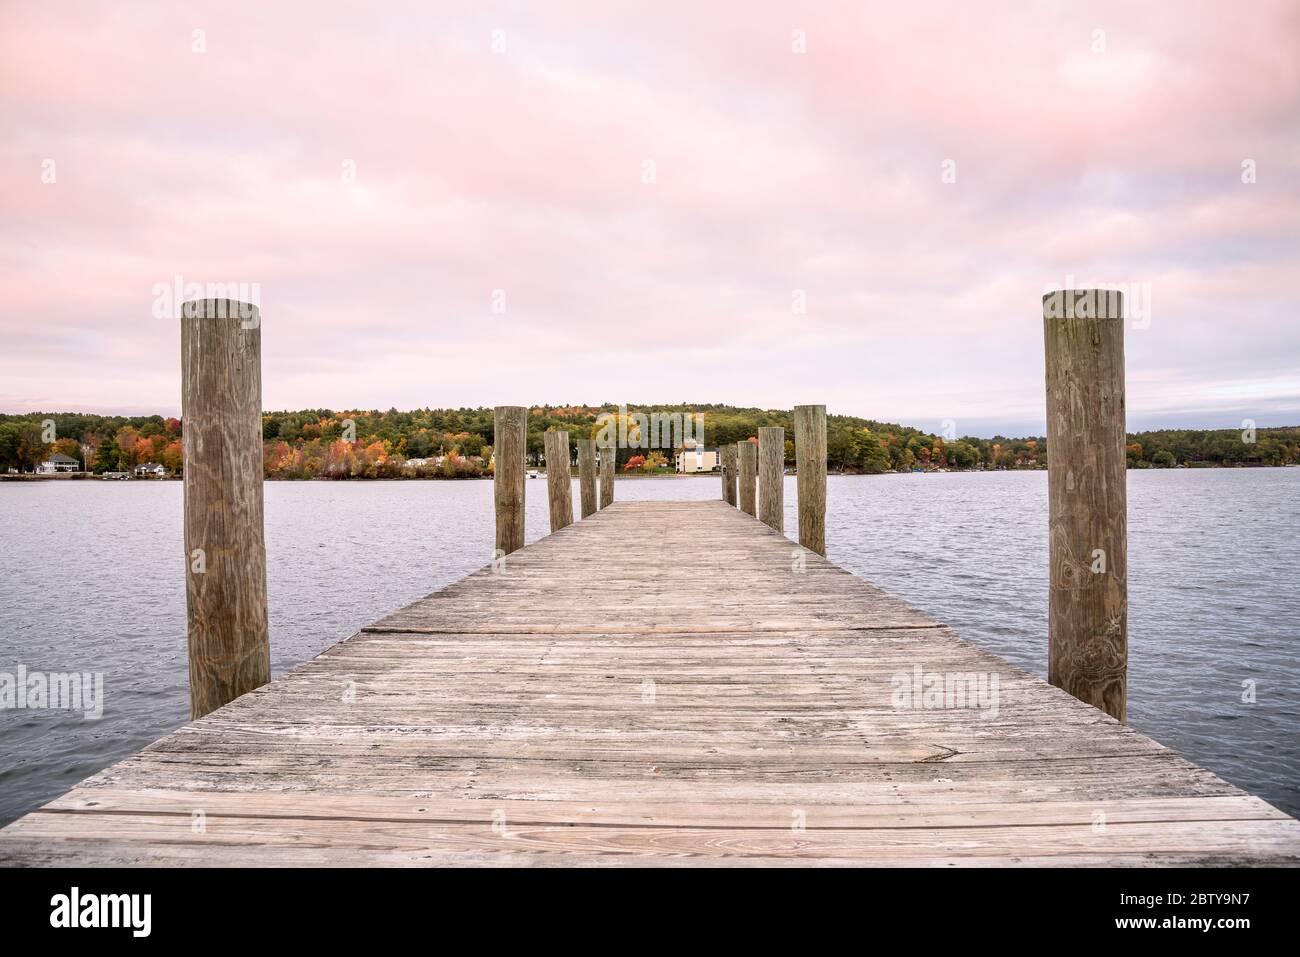 Deserted wooden jetty on a lake at dusk. Beautiful fall foliage visible on the other side of the lake. Concept of tranquility. Stock Photo